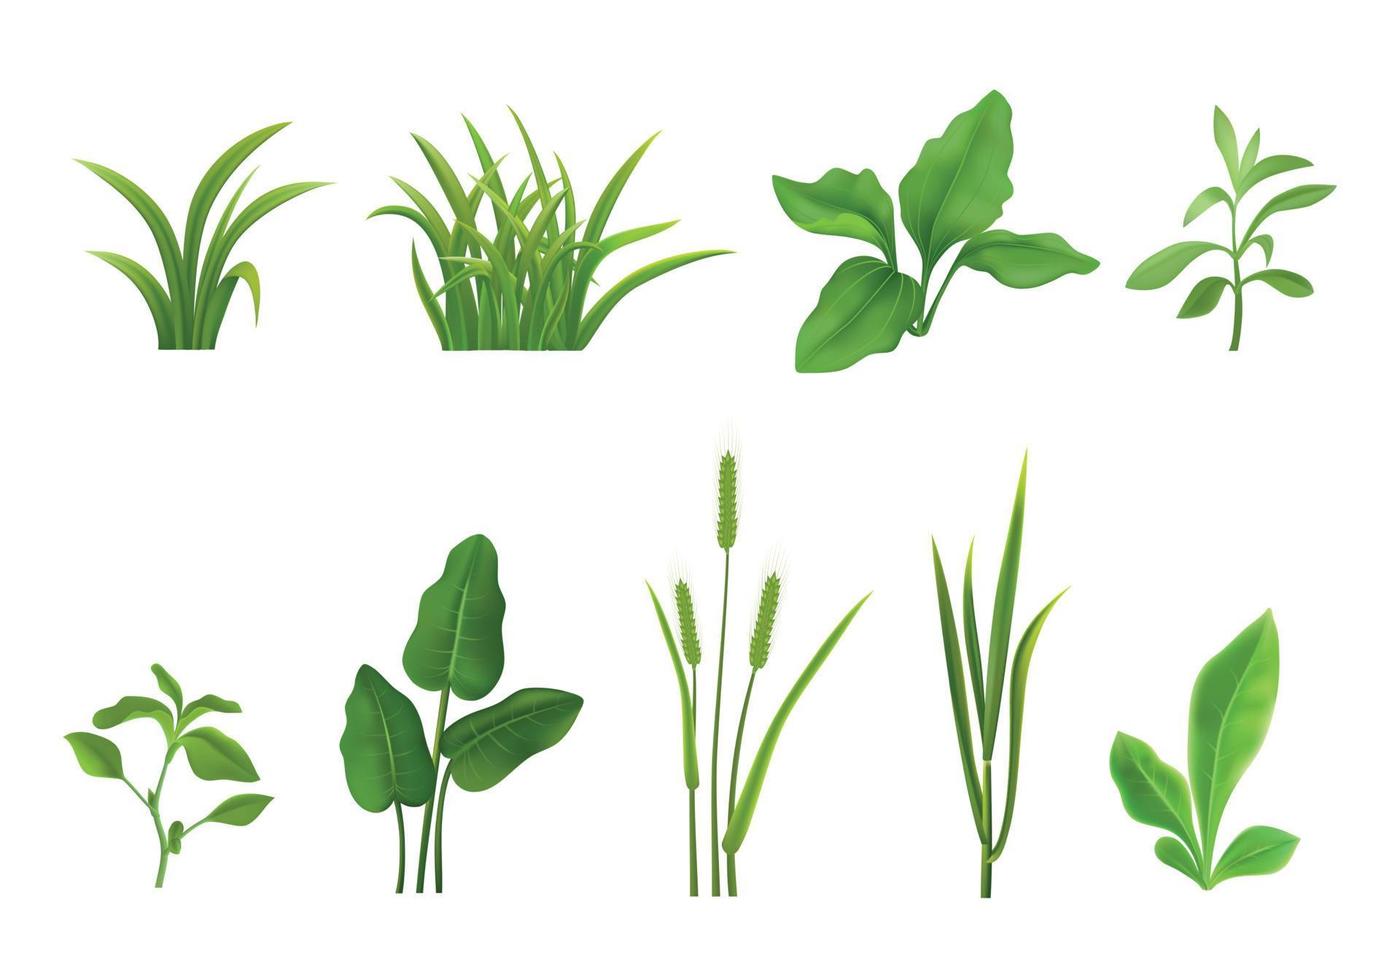 Grass Leaves Realistic Set vector